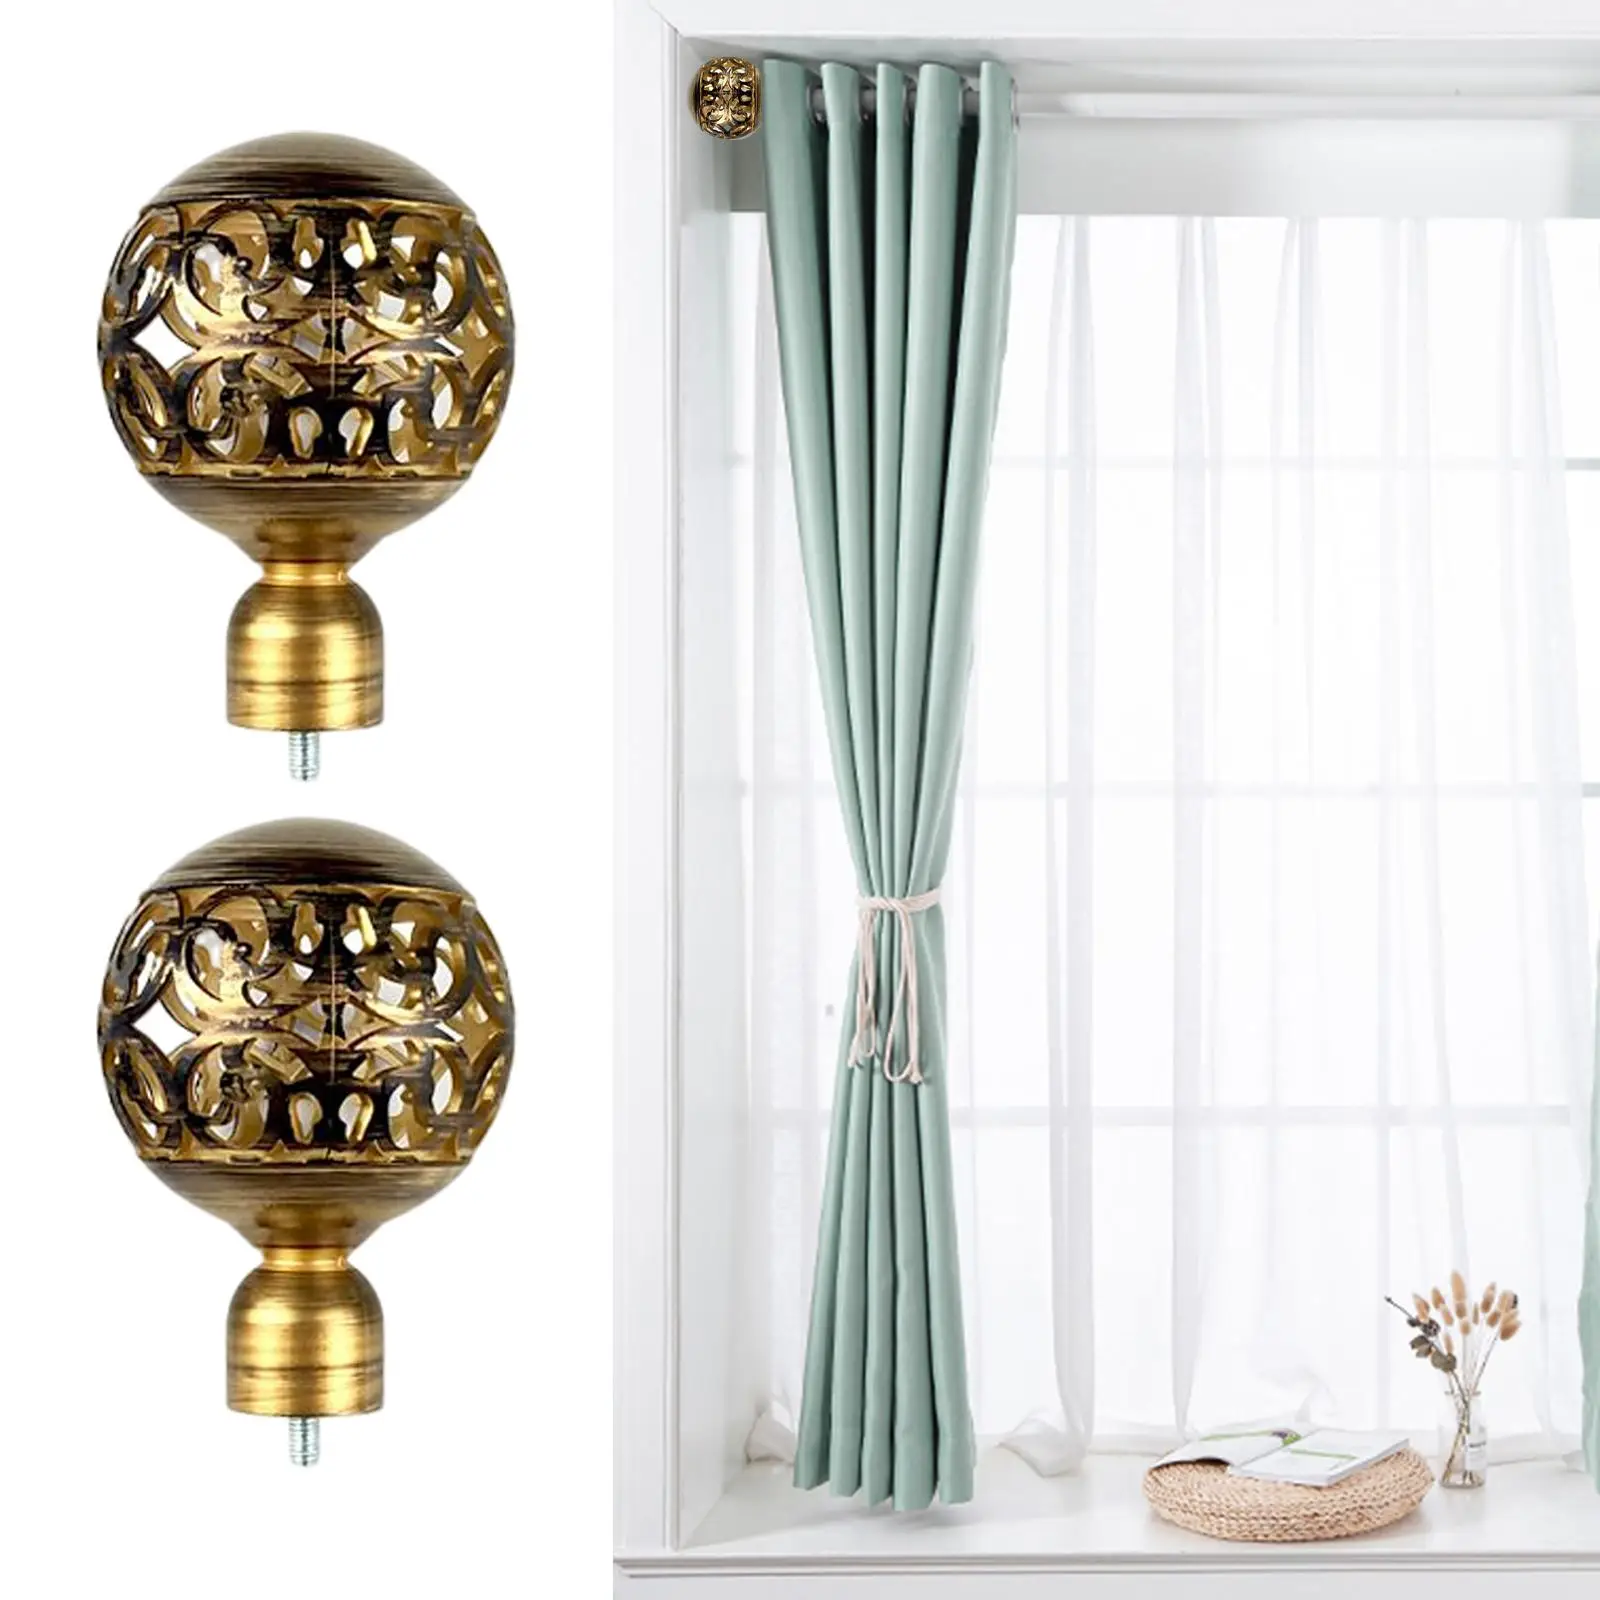 2x Window Curtain Rod Finial Ends 3/4 inch Diameter Vintage Decorative Drapery Rod Finials for Home Bathroom Living Room